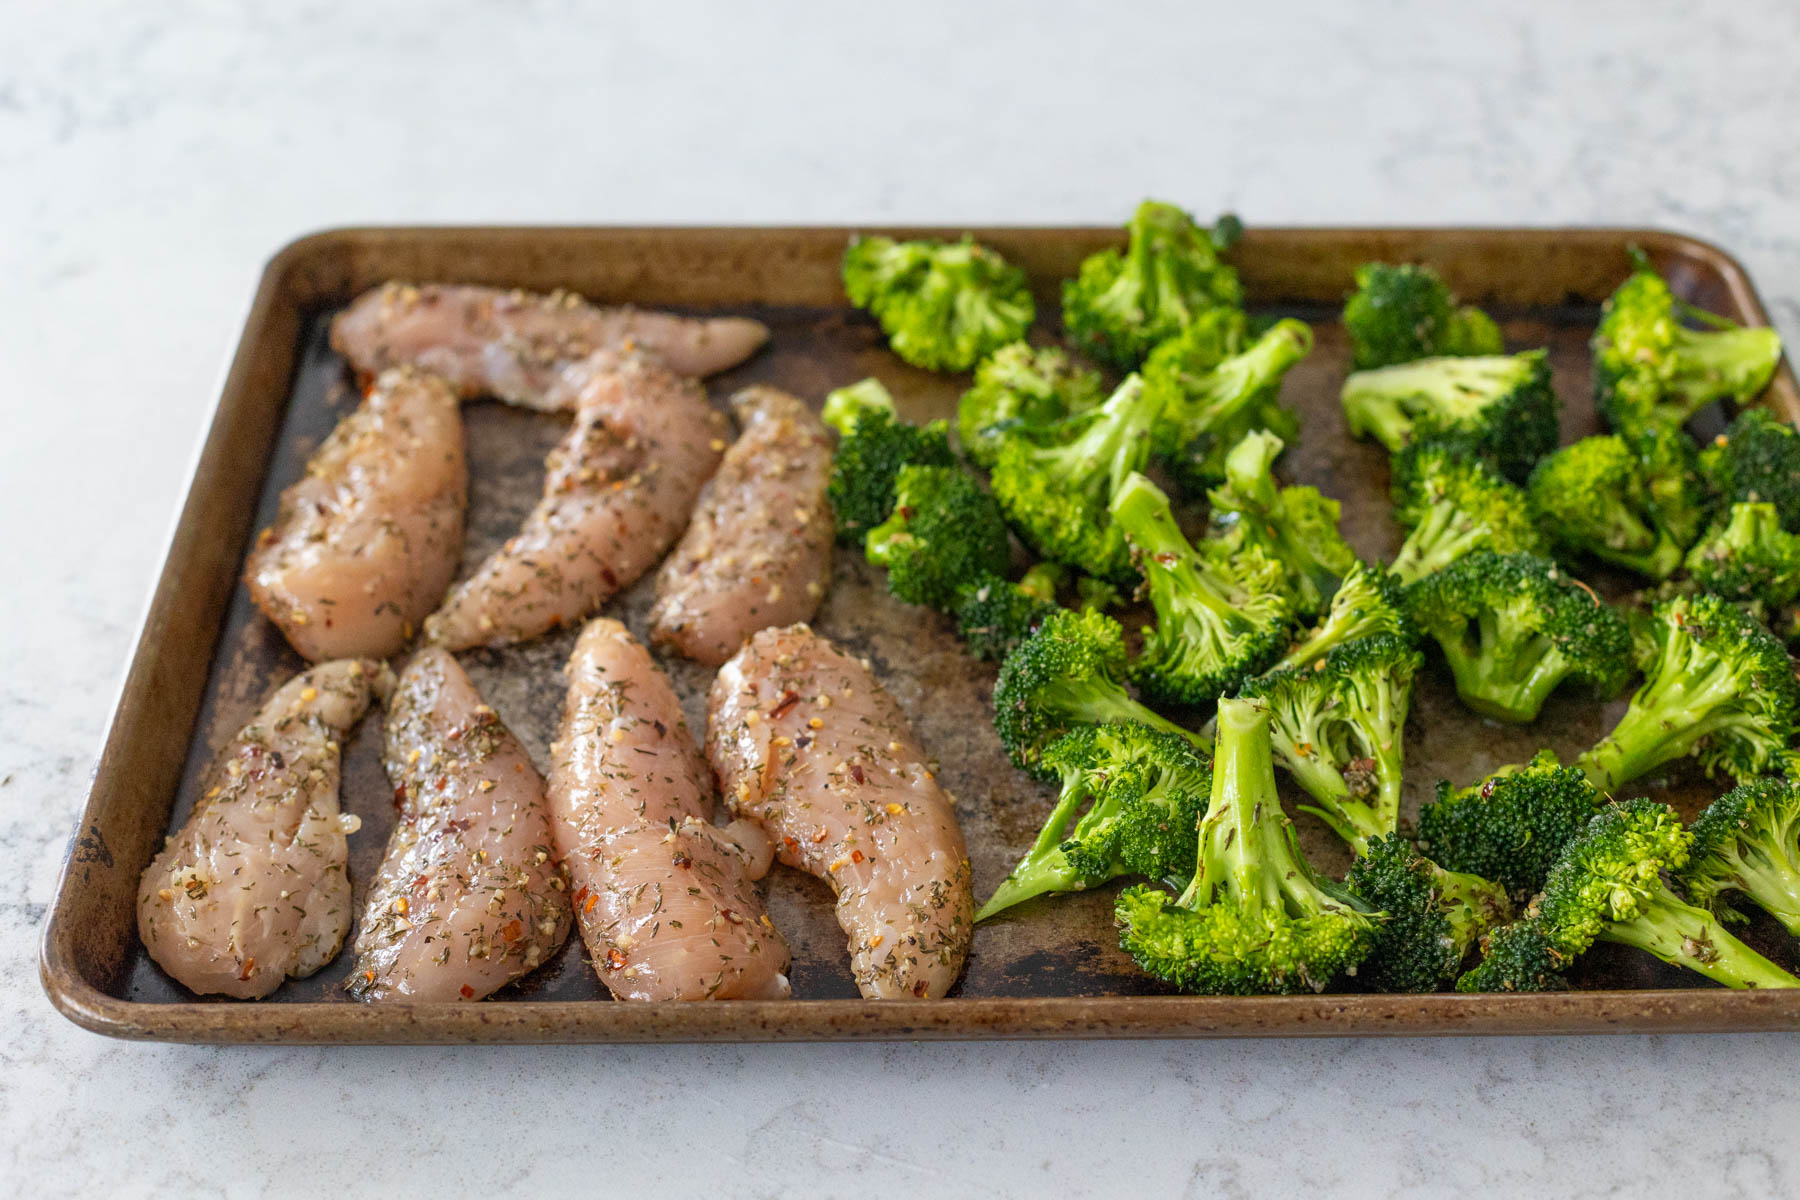 The chicken and broccoli have been seasoned and spread on a sheet pan.